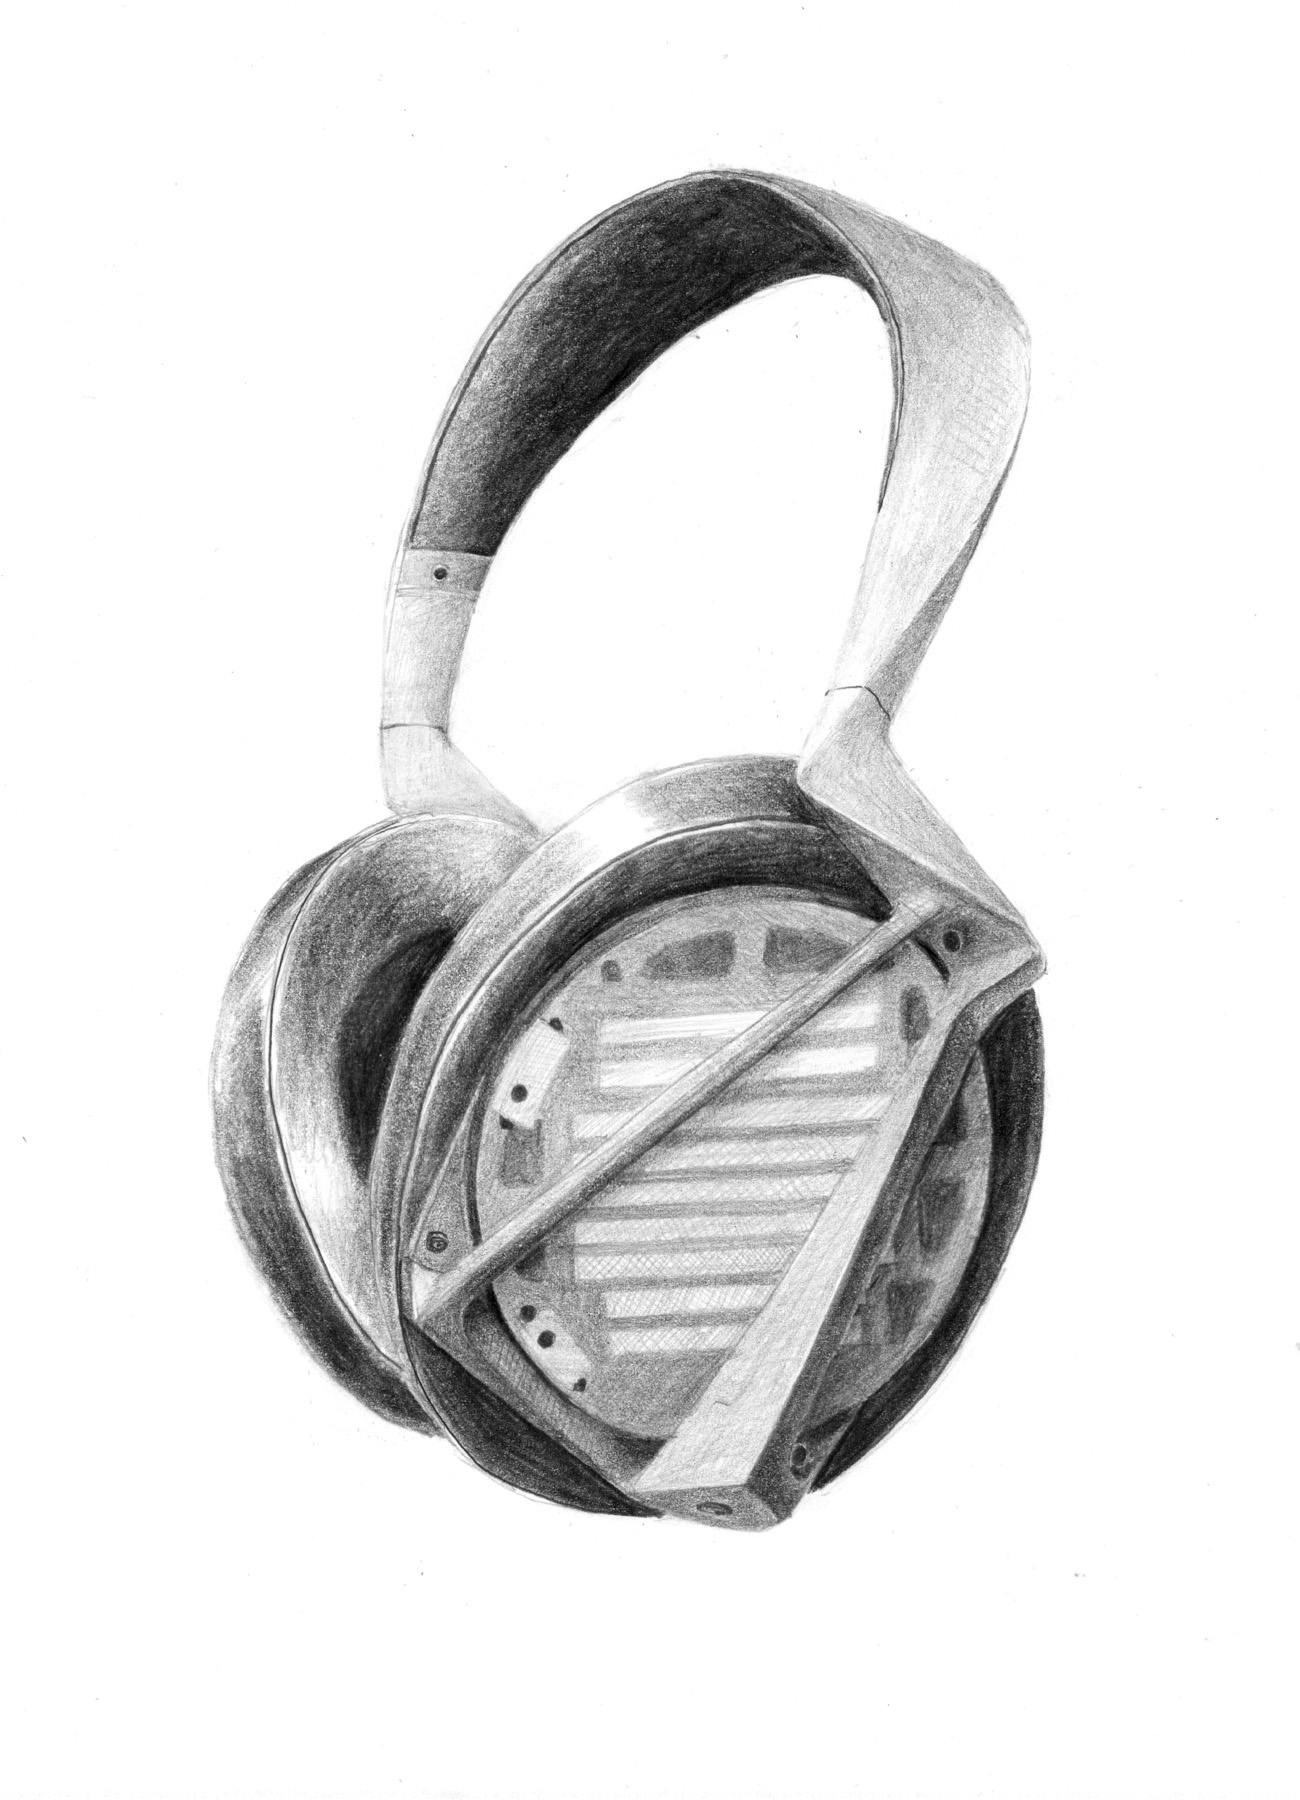 Shaded render of the chosen design. The frame is a lighter color, holding up completely exposed drivers and dark leather earpads.